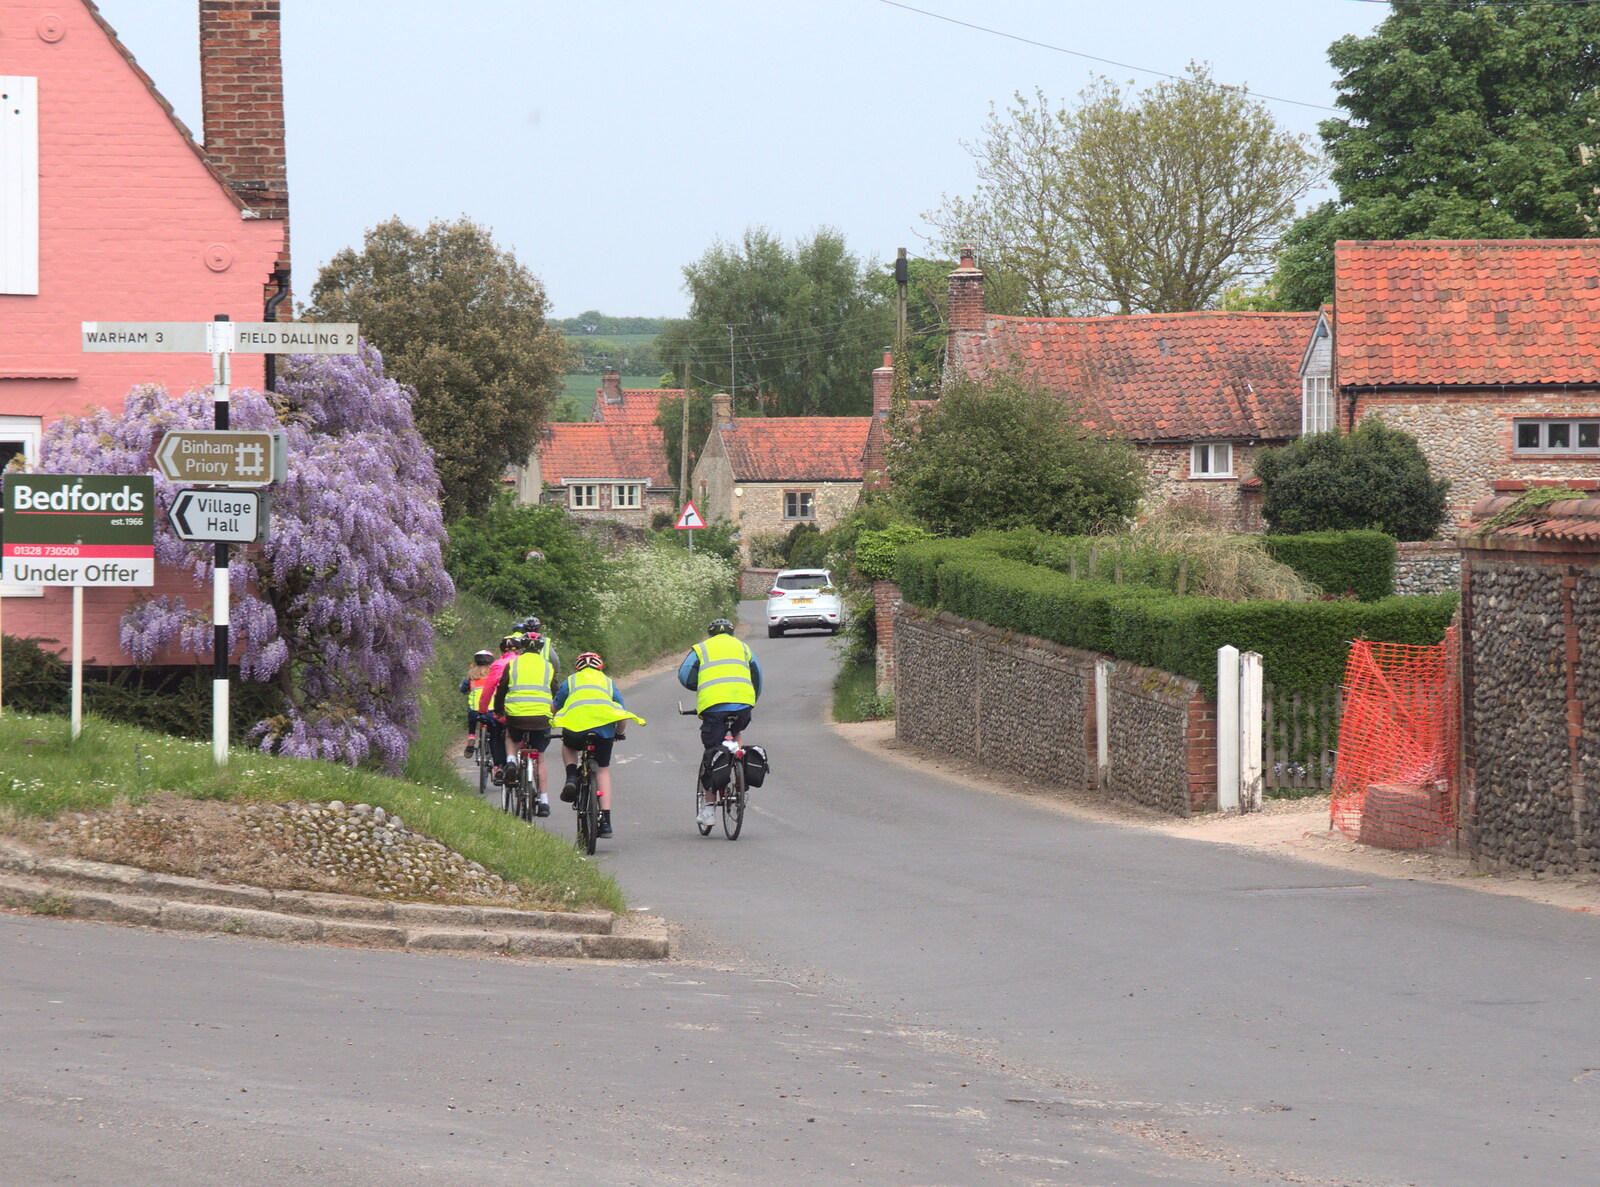 The Saga group head off past the wisteria from The BSCC Weekend Away, Holt, Norfolk - 12th May 2018